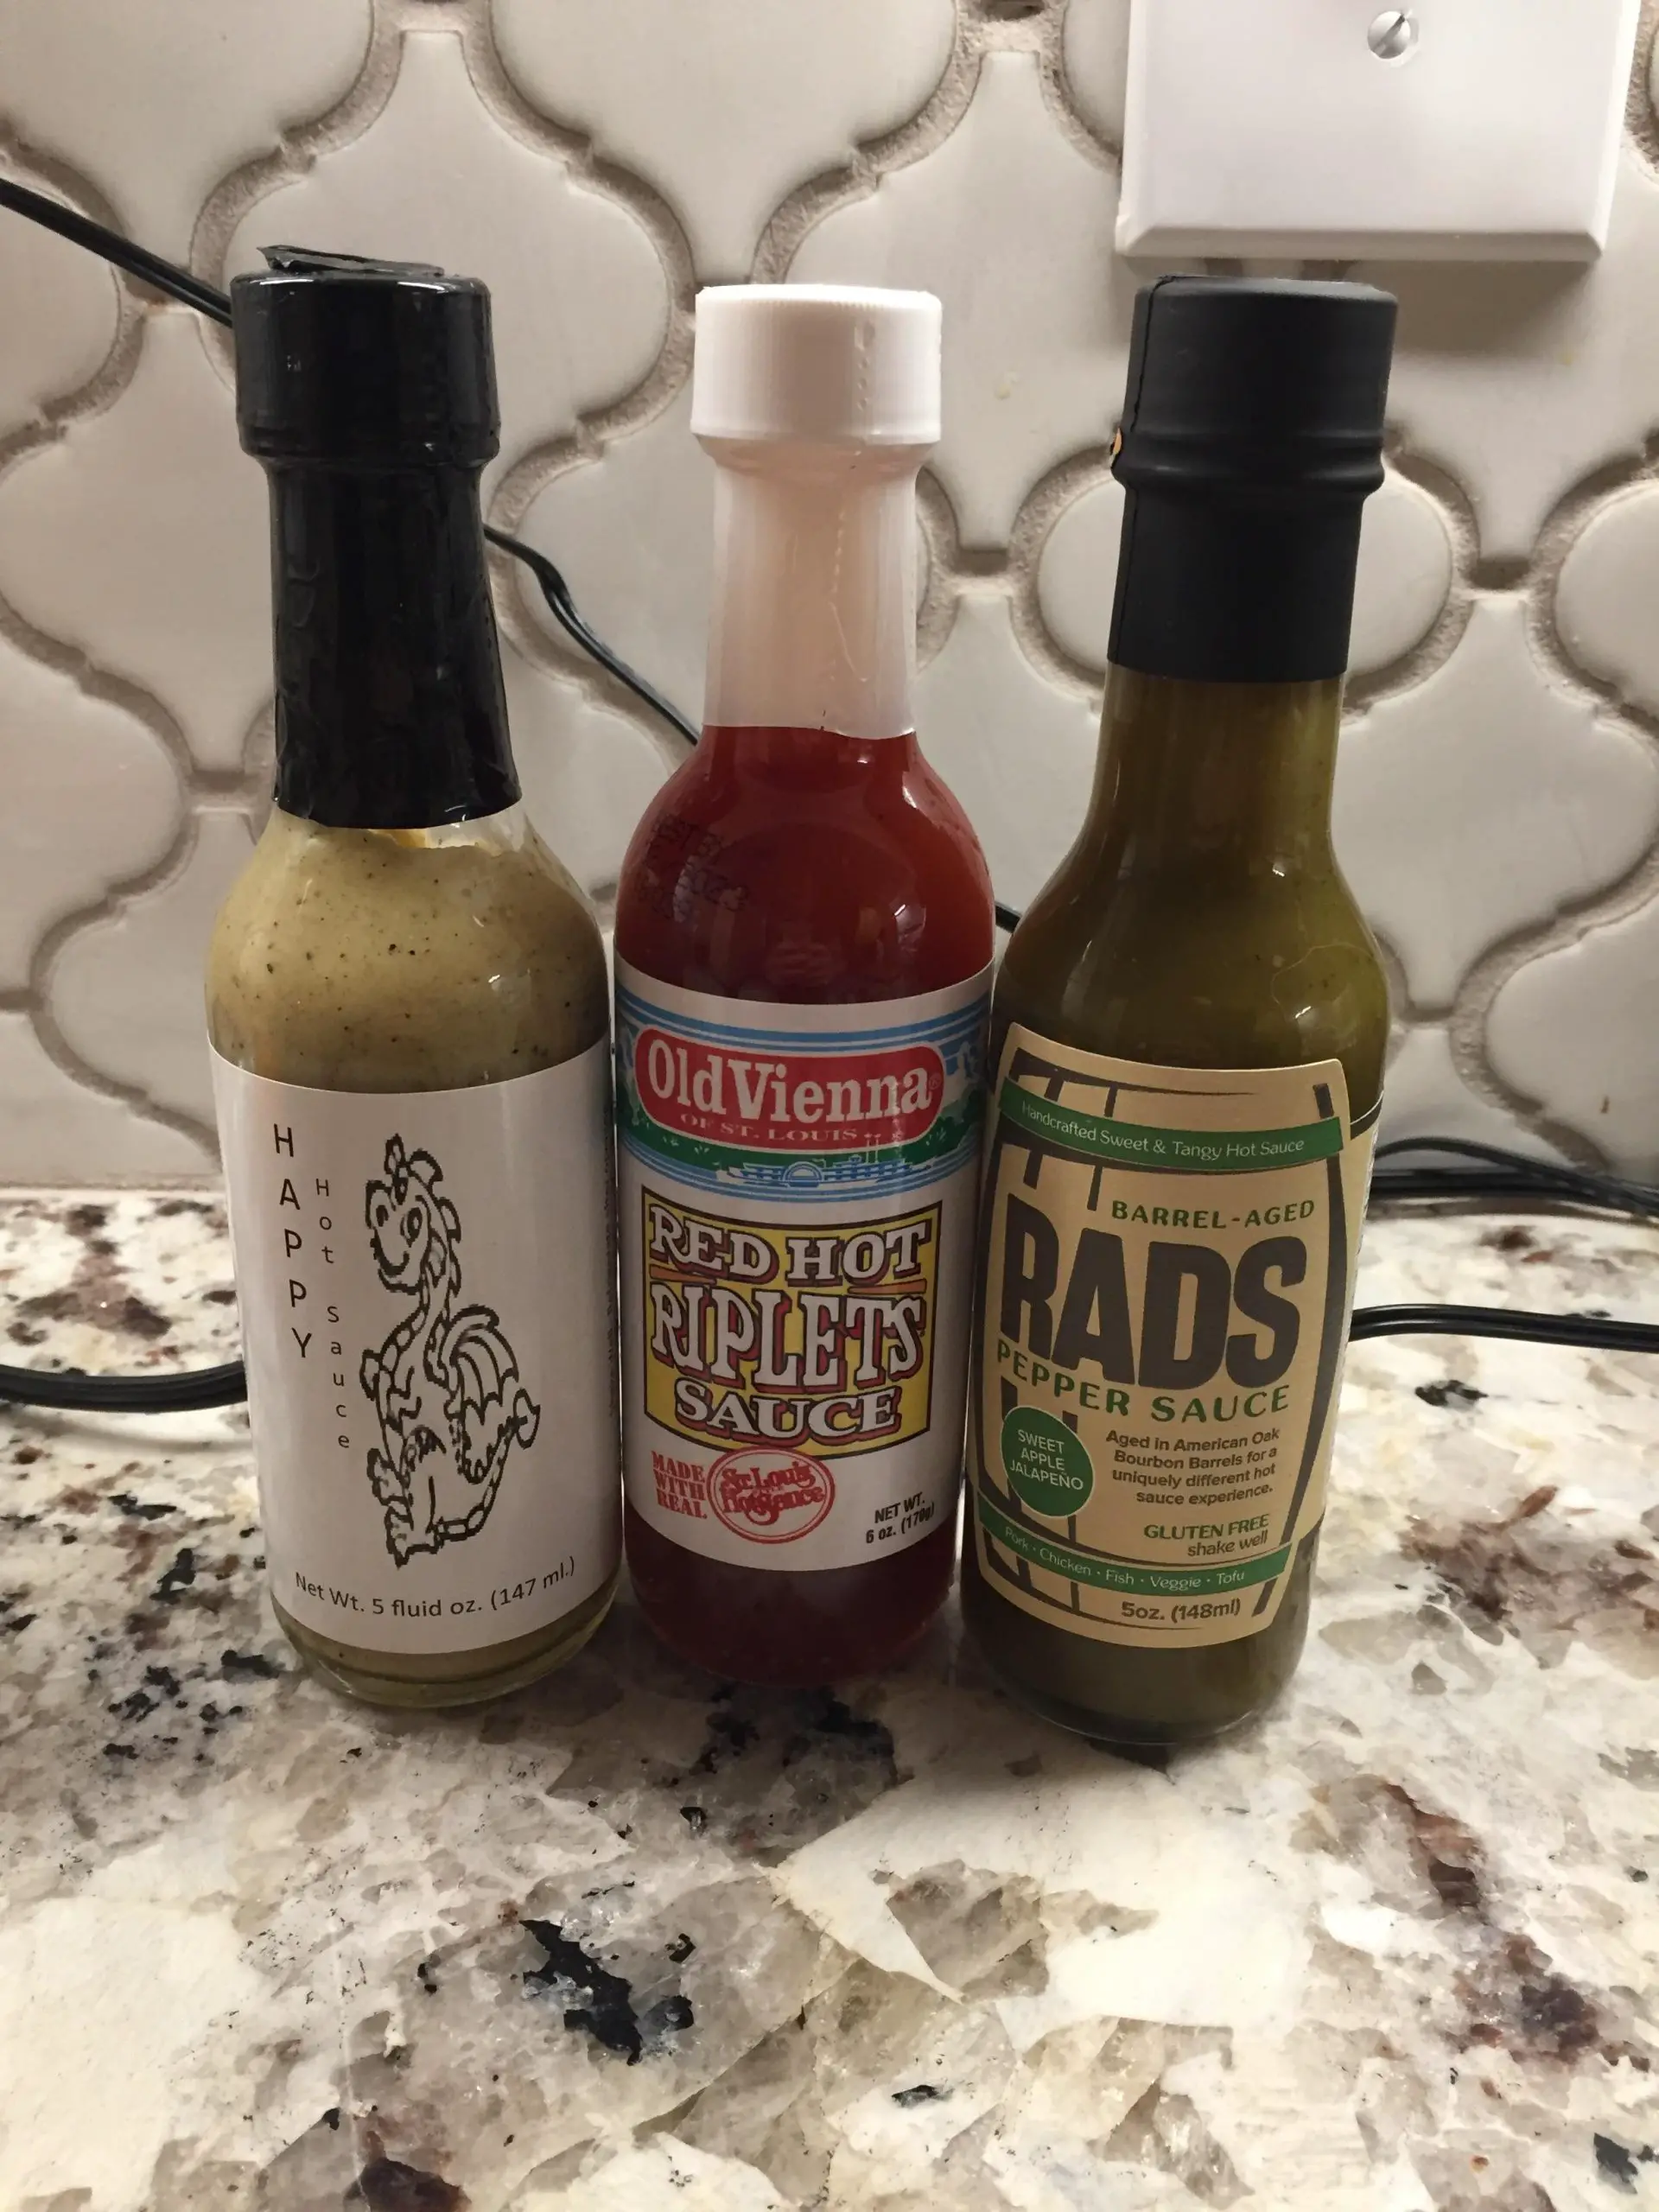 All local hot sauces from St. Louis! : hotsauce